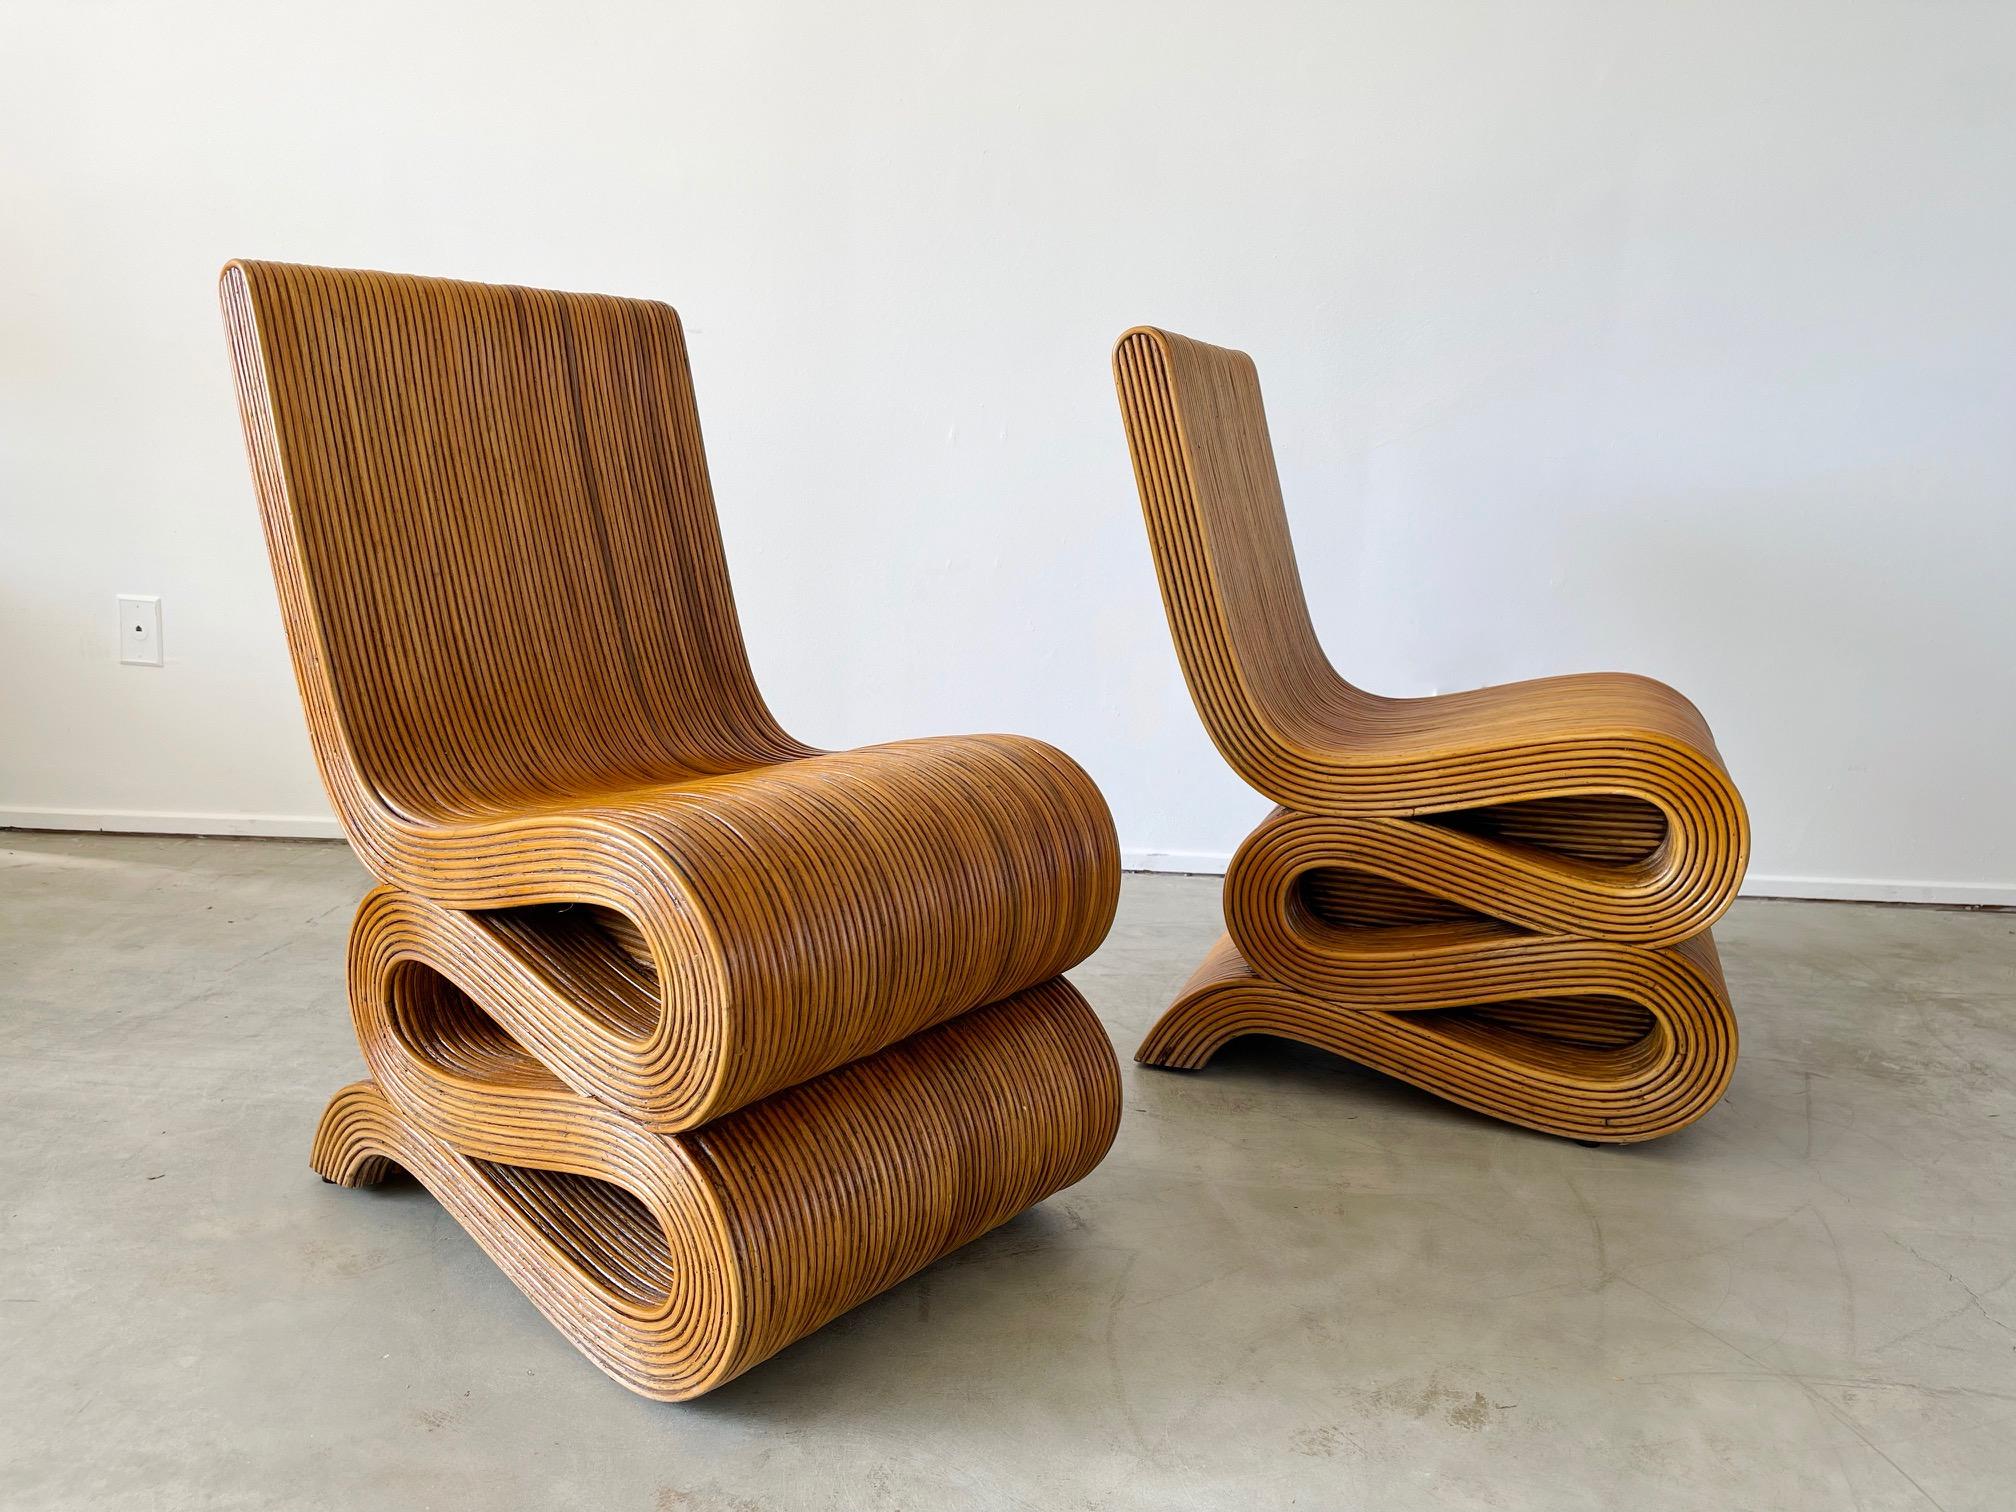 Rare pair of unique bent bamboo chairs in the shape of infamous Frank Gehry's 